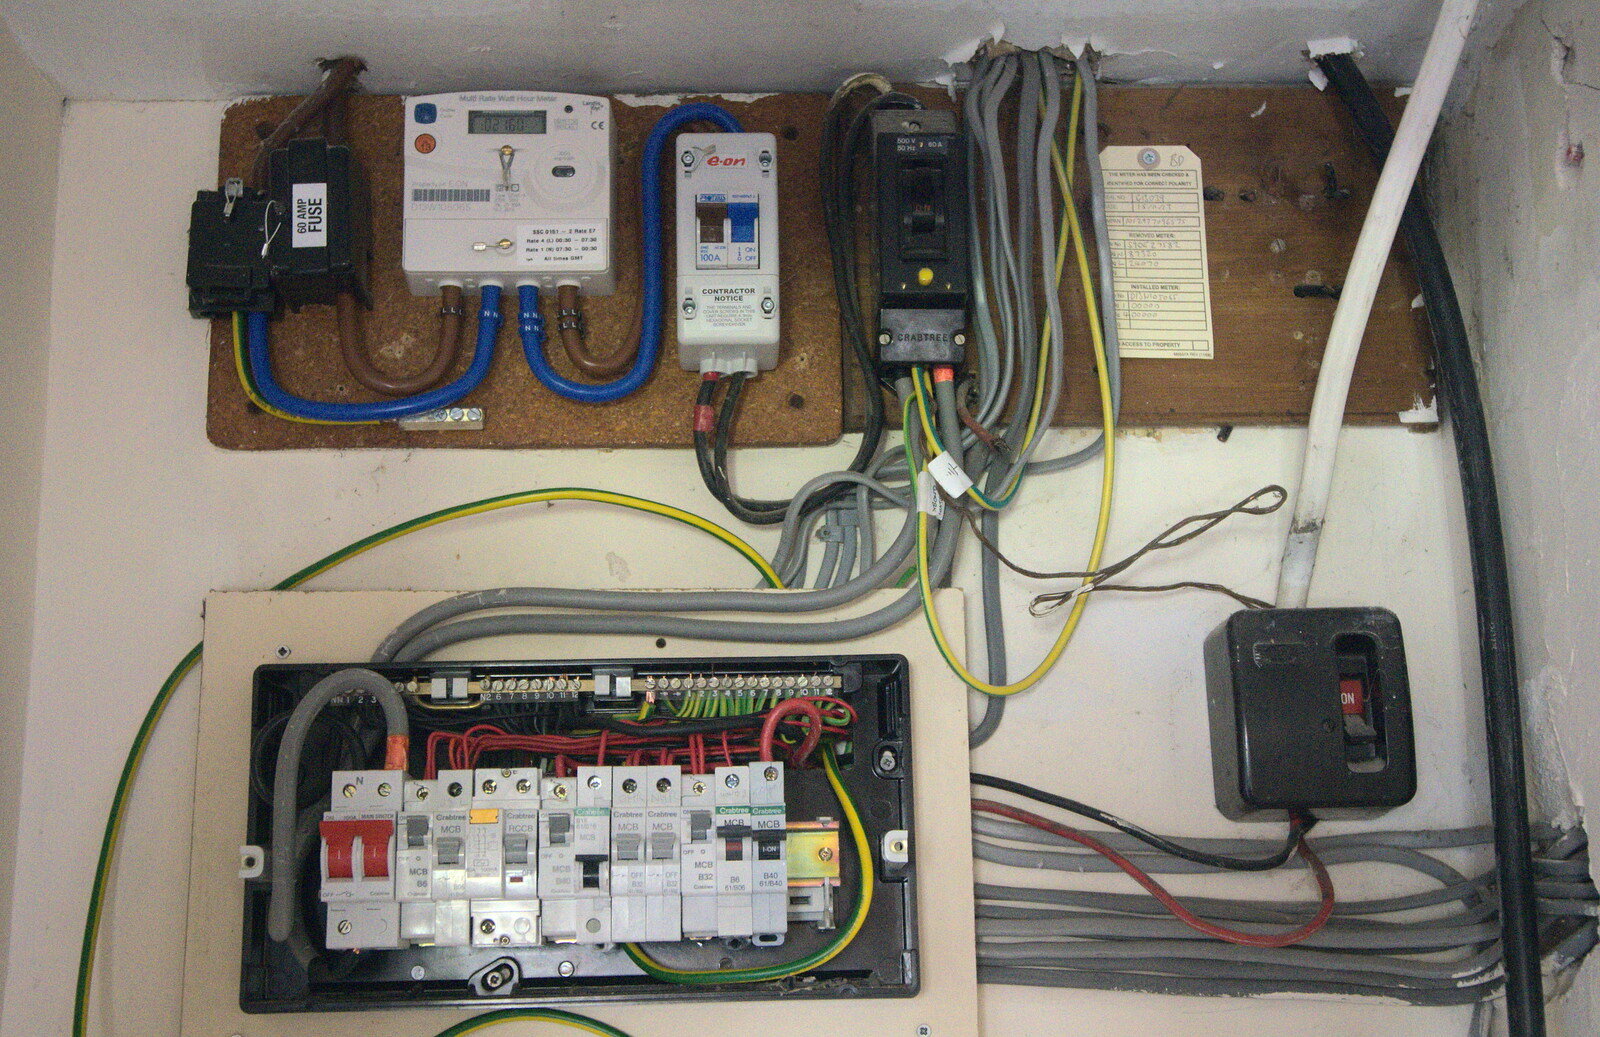 Nosher's previous 1990s consumer unit from Building Progress: Electrical Second Fixing, Brome, Suffolk - 4th March 2014